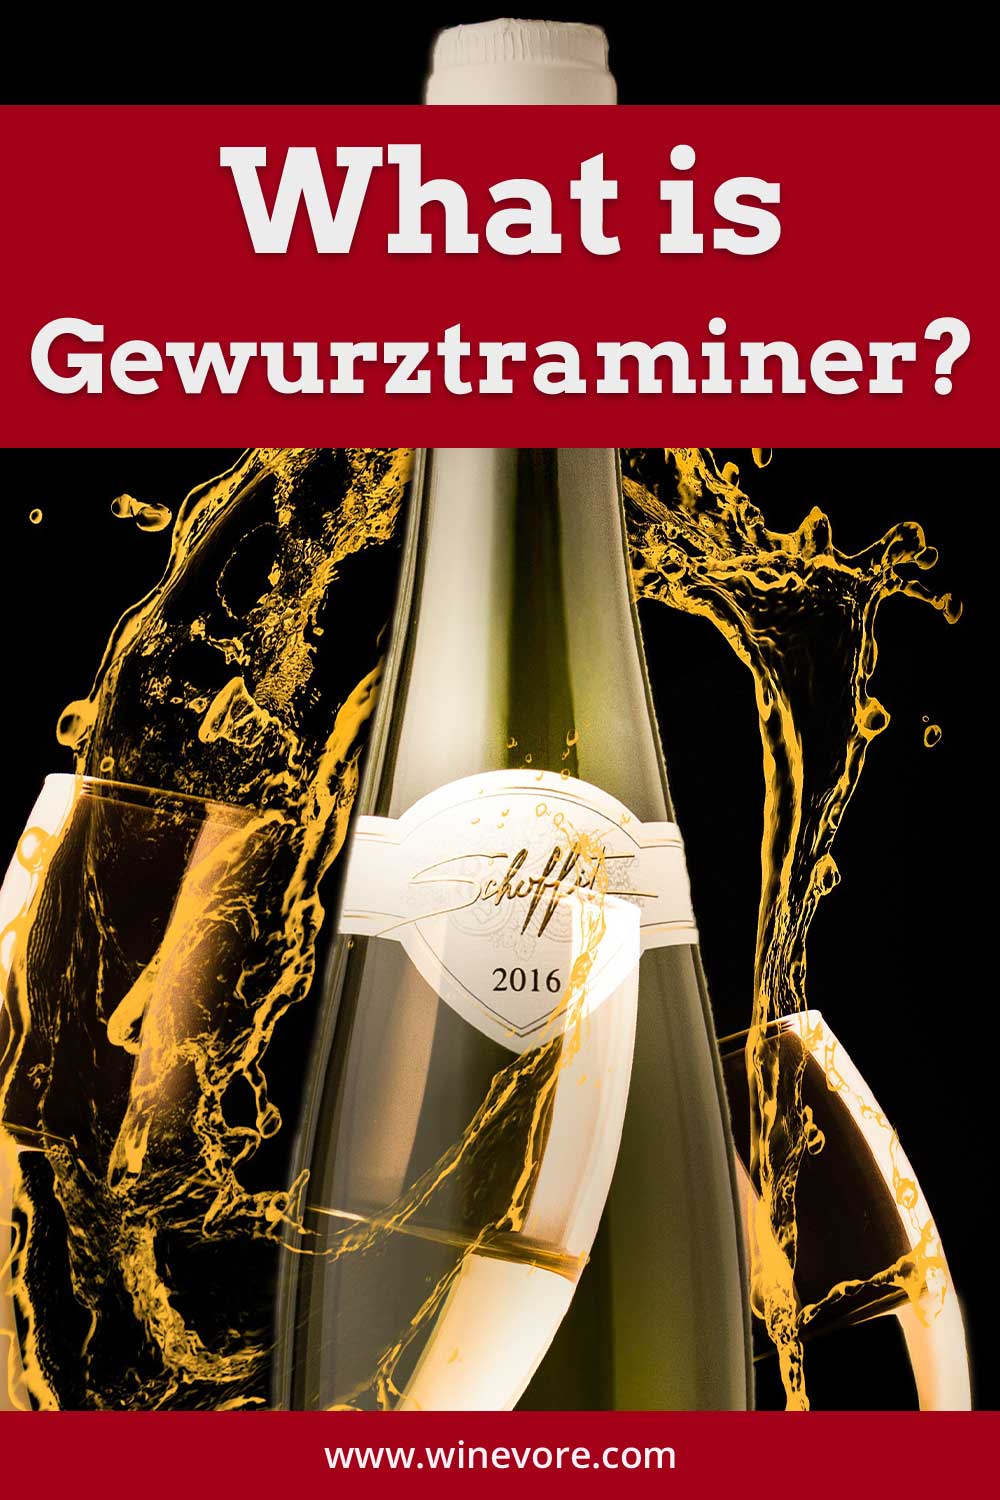 Wine bottle and splash of white wine in two glasses in front of dark surface - What is Gewurztraminer?